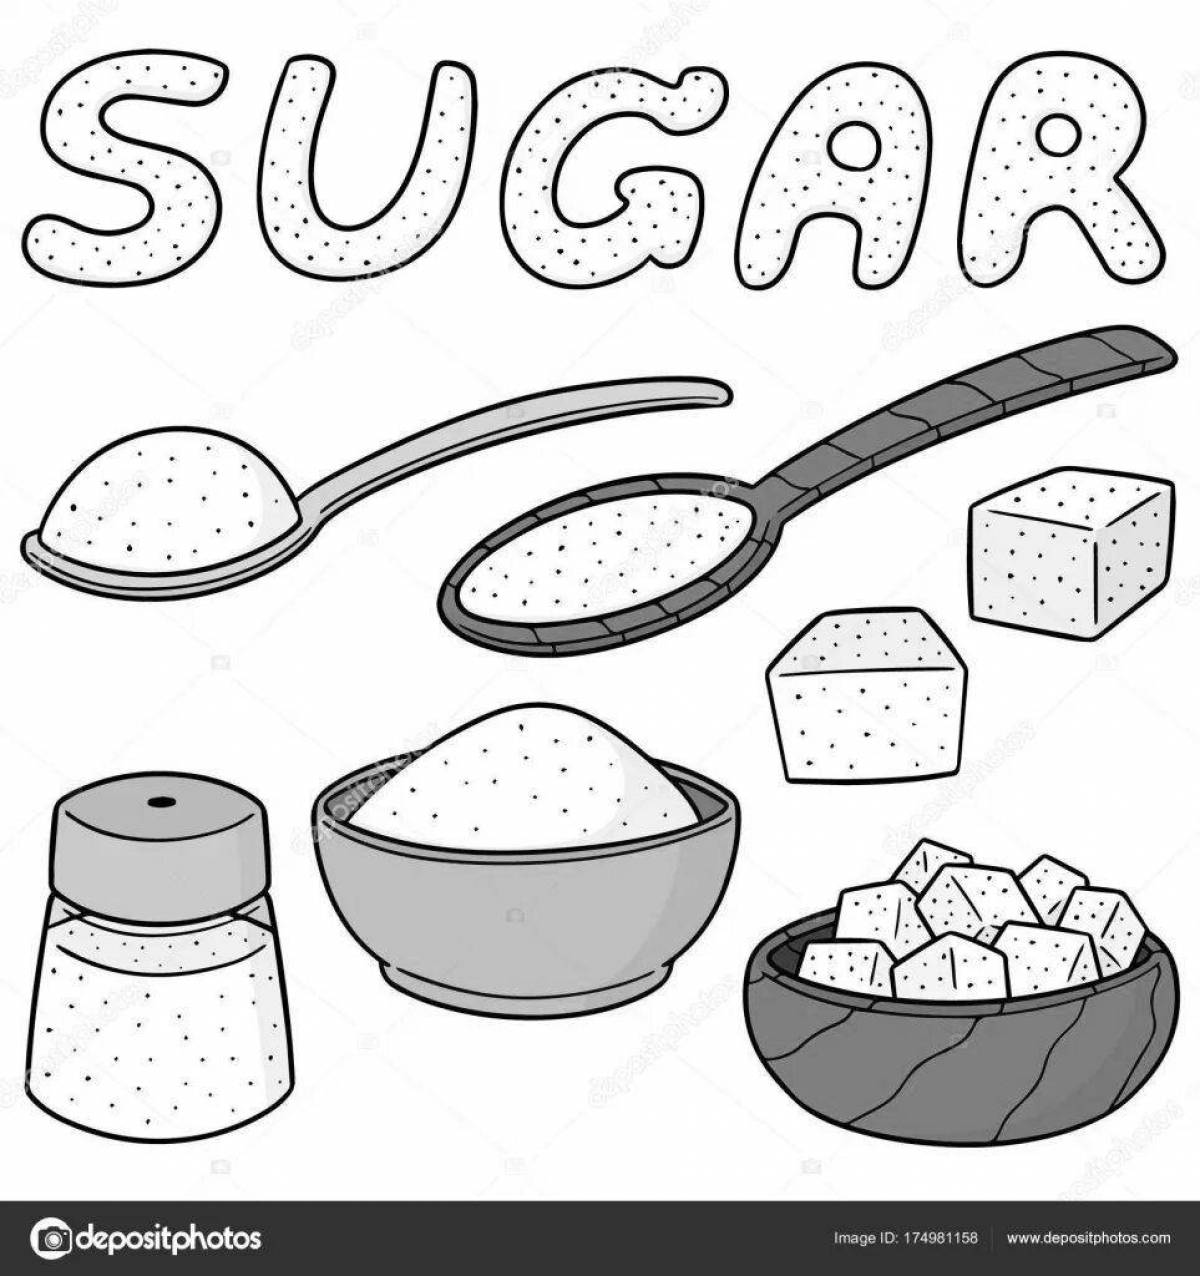 Coloring book shiny sucrose